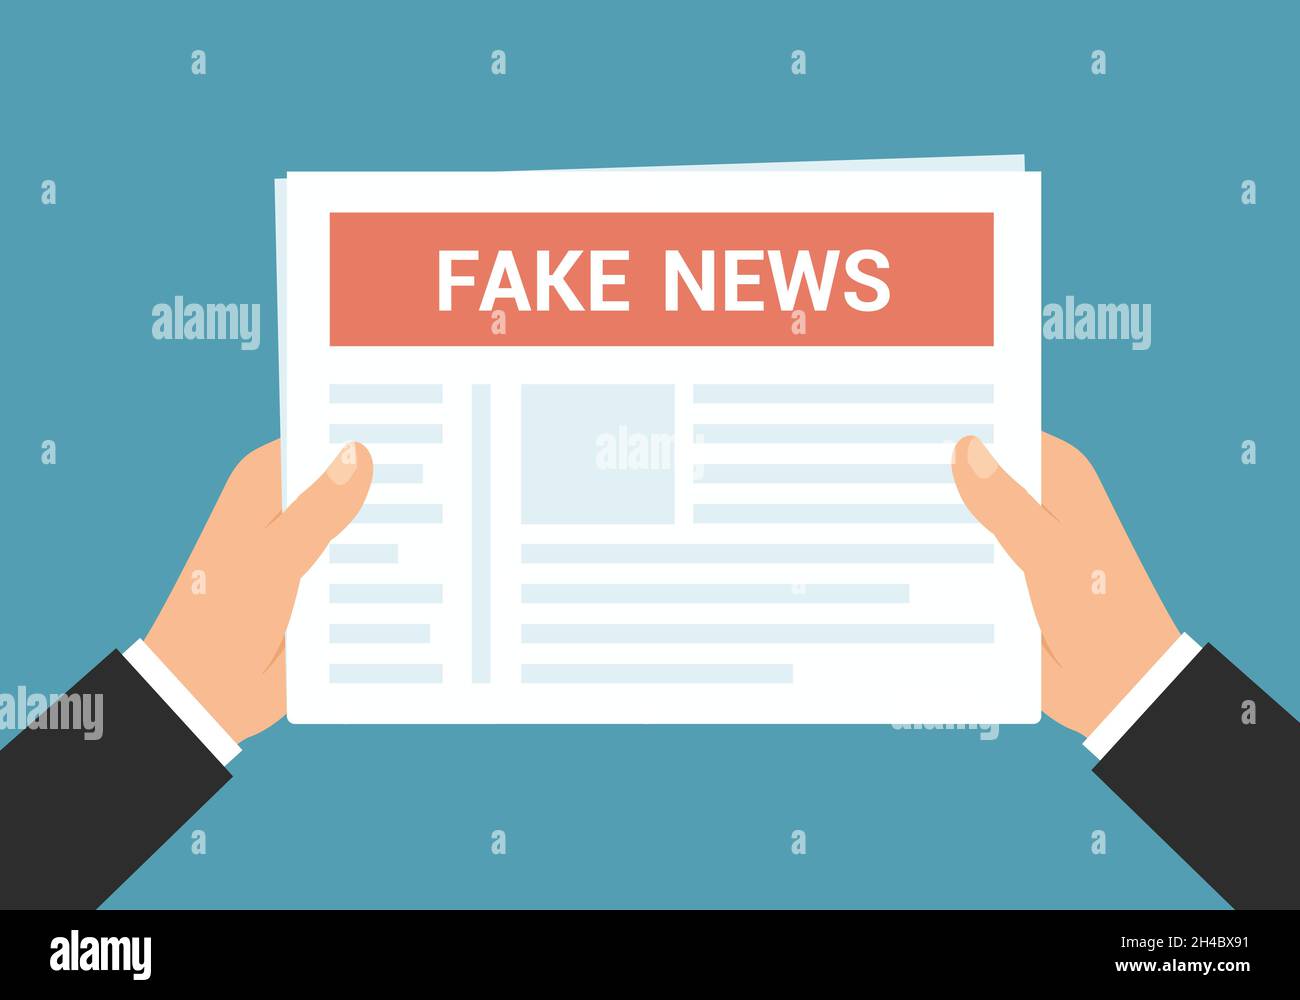 Flat design illustration of manager's hands holding newspaper and reading fake news - vector Stock Vector